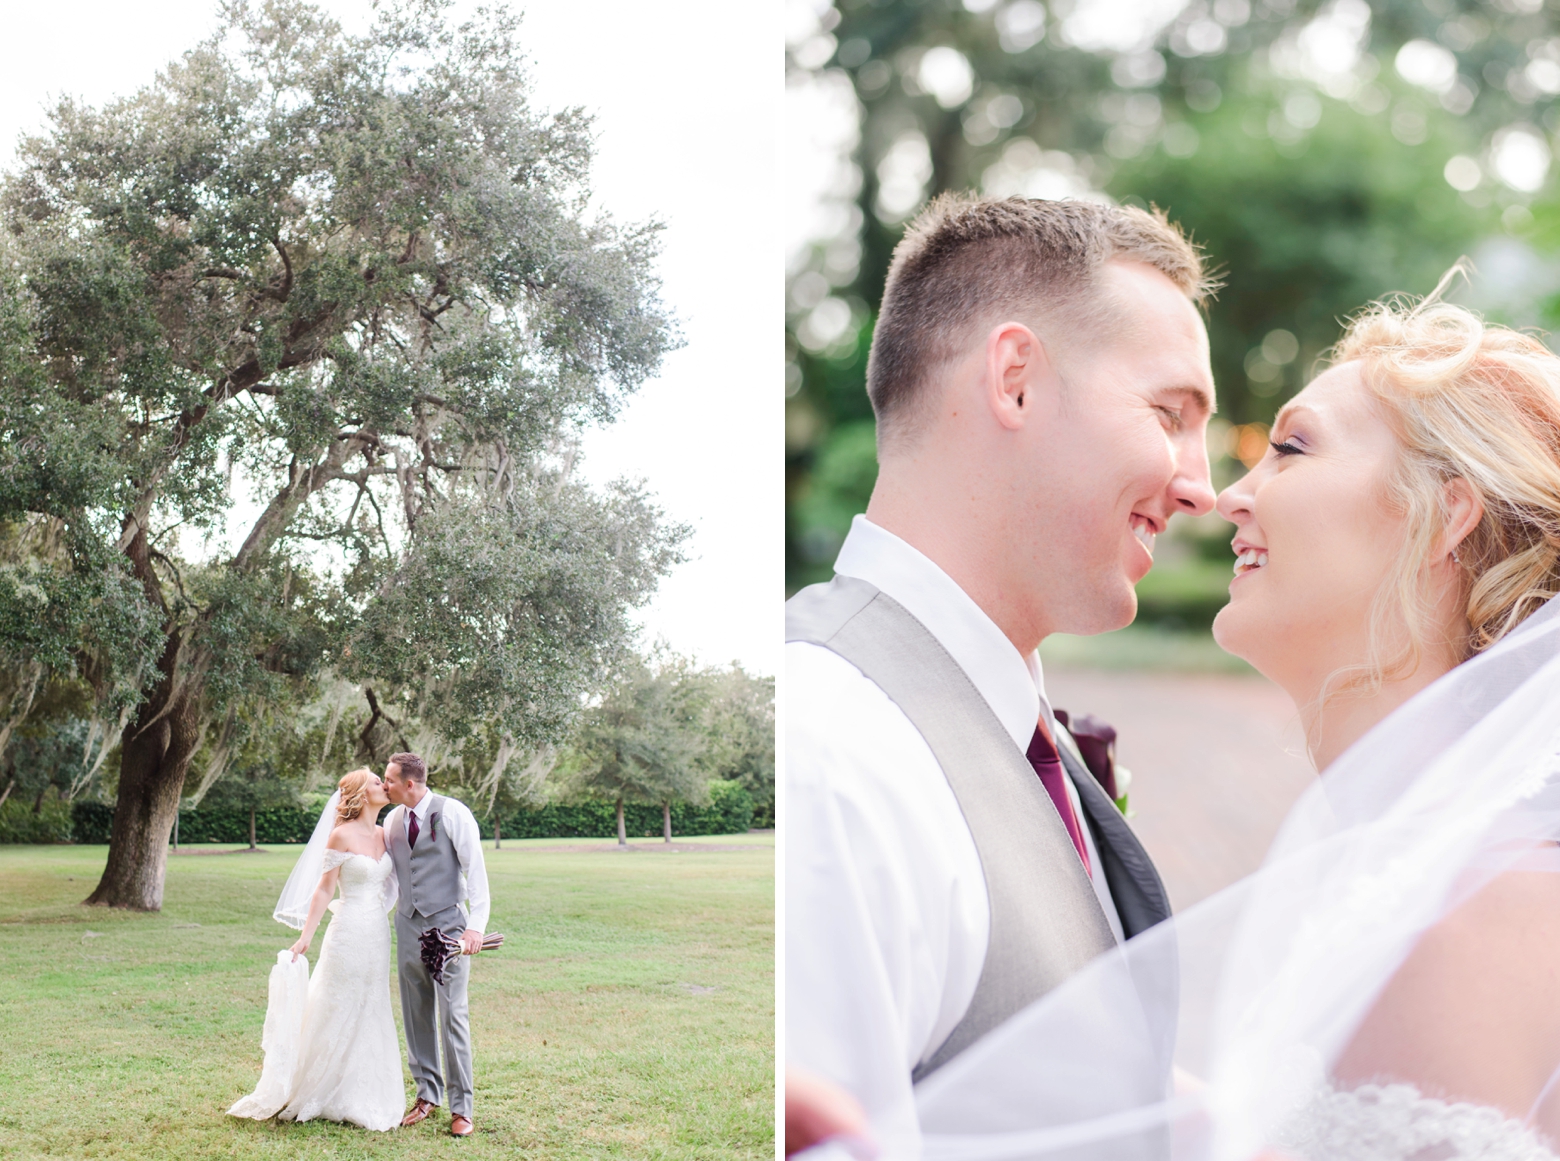 The newlyweds share an intimate smile and kiss surrounded by trees in rural Tampa, FL